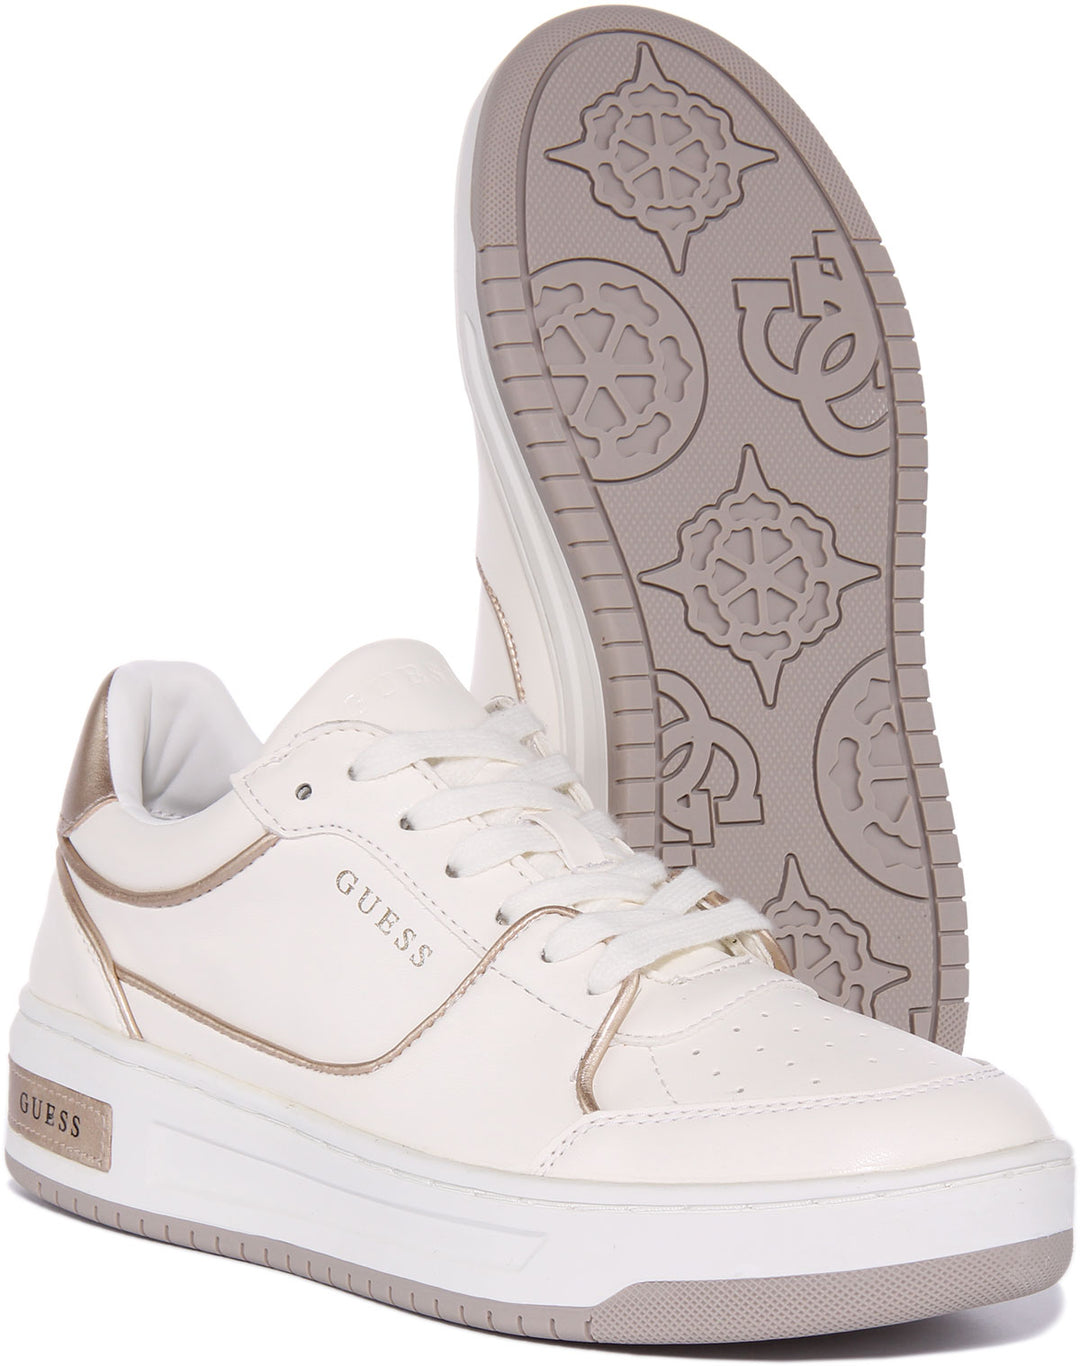 Guess Tokyo Trainer In White Gold For Women